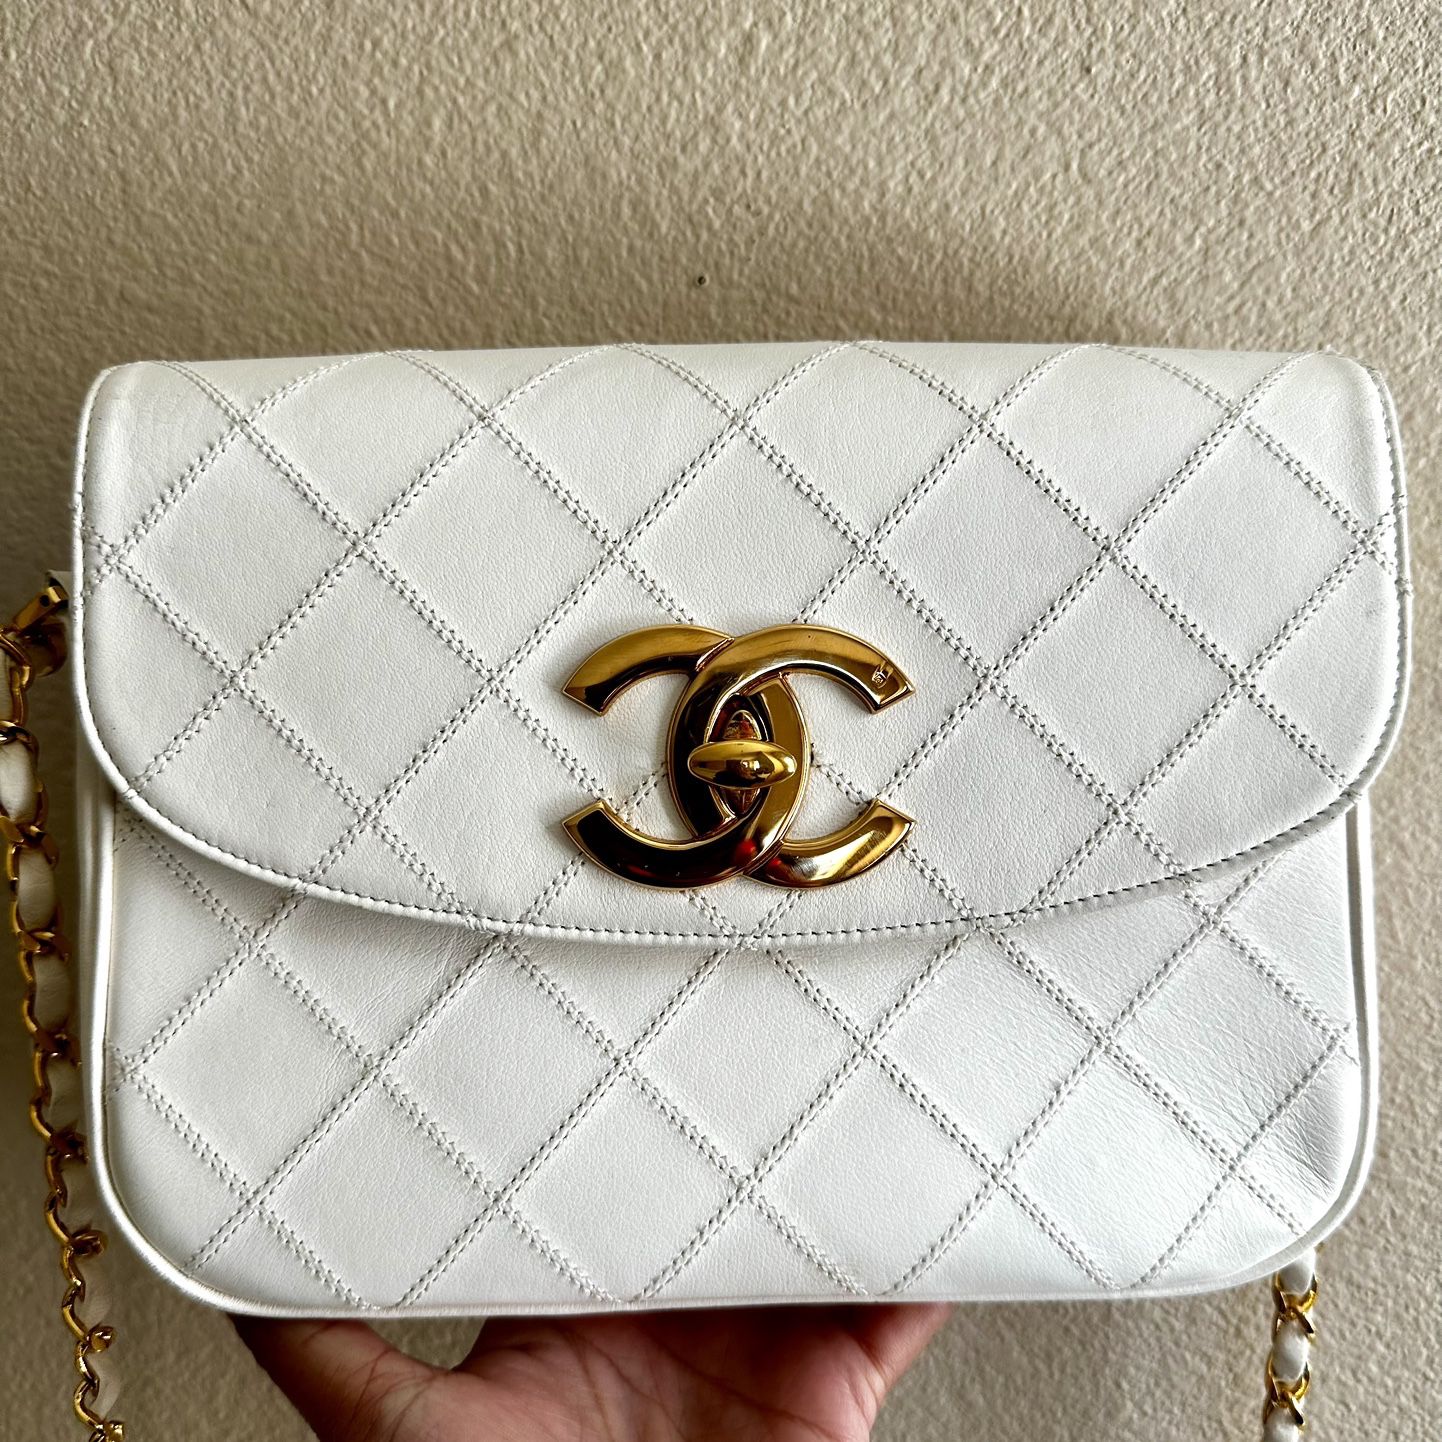 Chanel Vintage Tote Bag for Sale in Bakersfield, CA - OfferUp